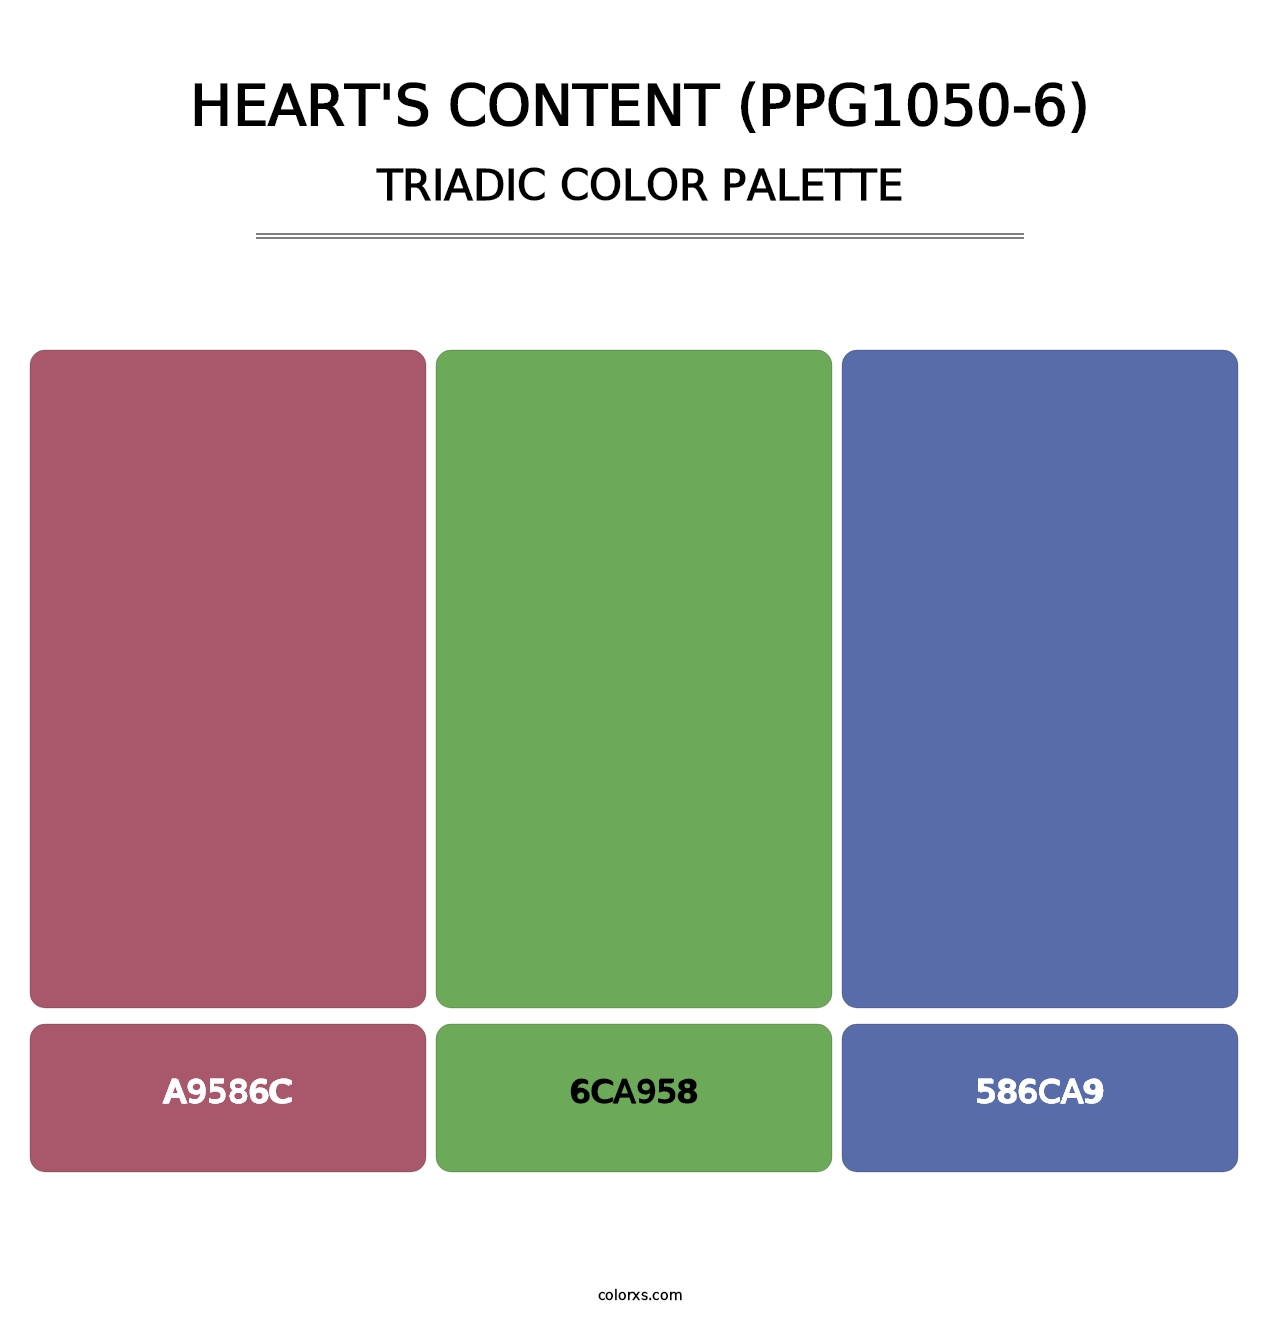 Heart's Content (PPG1050-6) - Triadic Color Palette